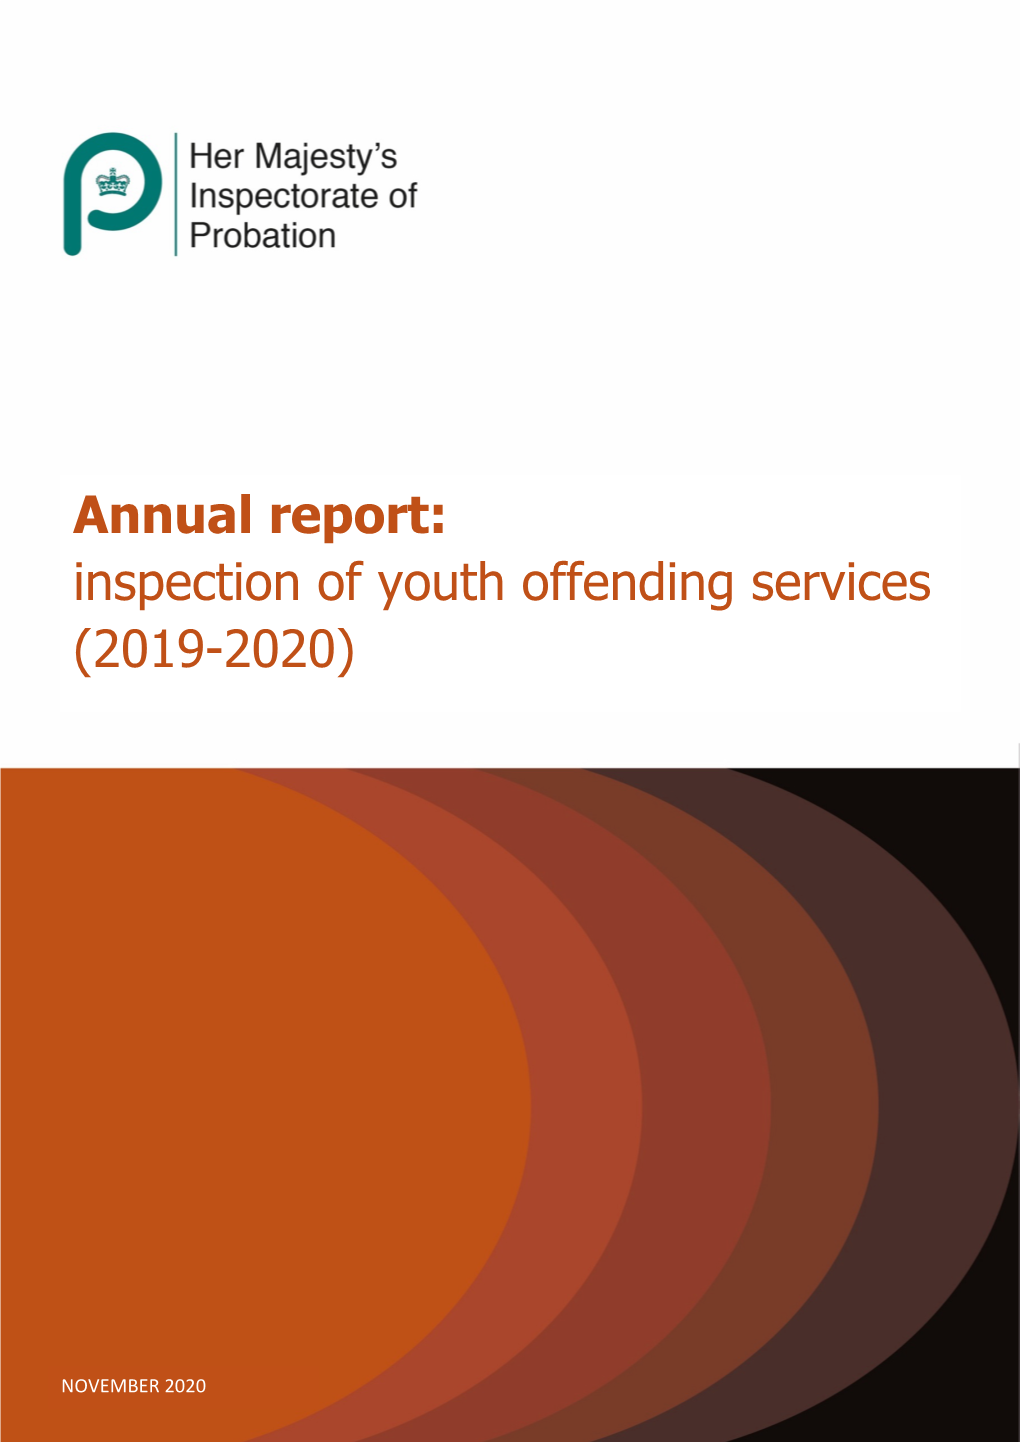 Annual Report: Inspection of Youth Offending Services (2019-2020)